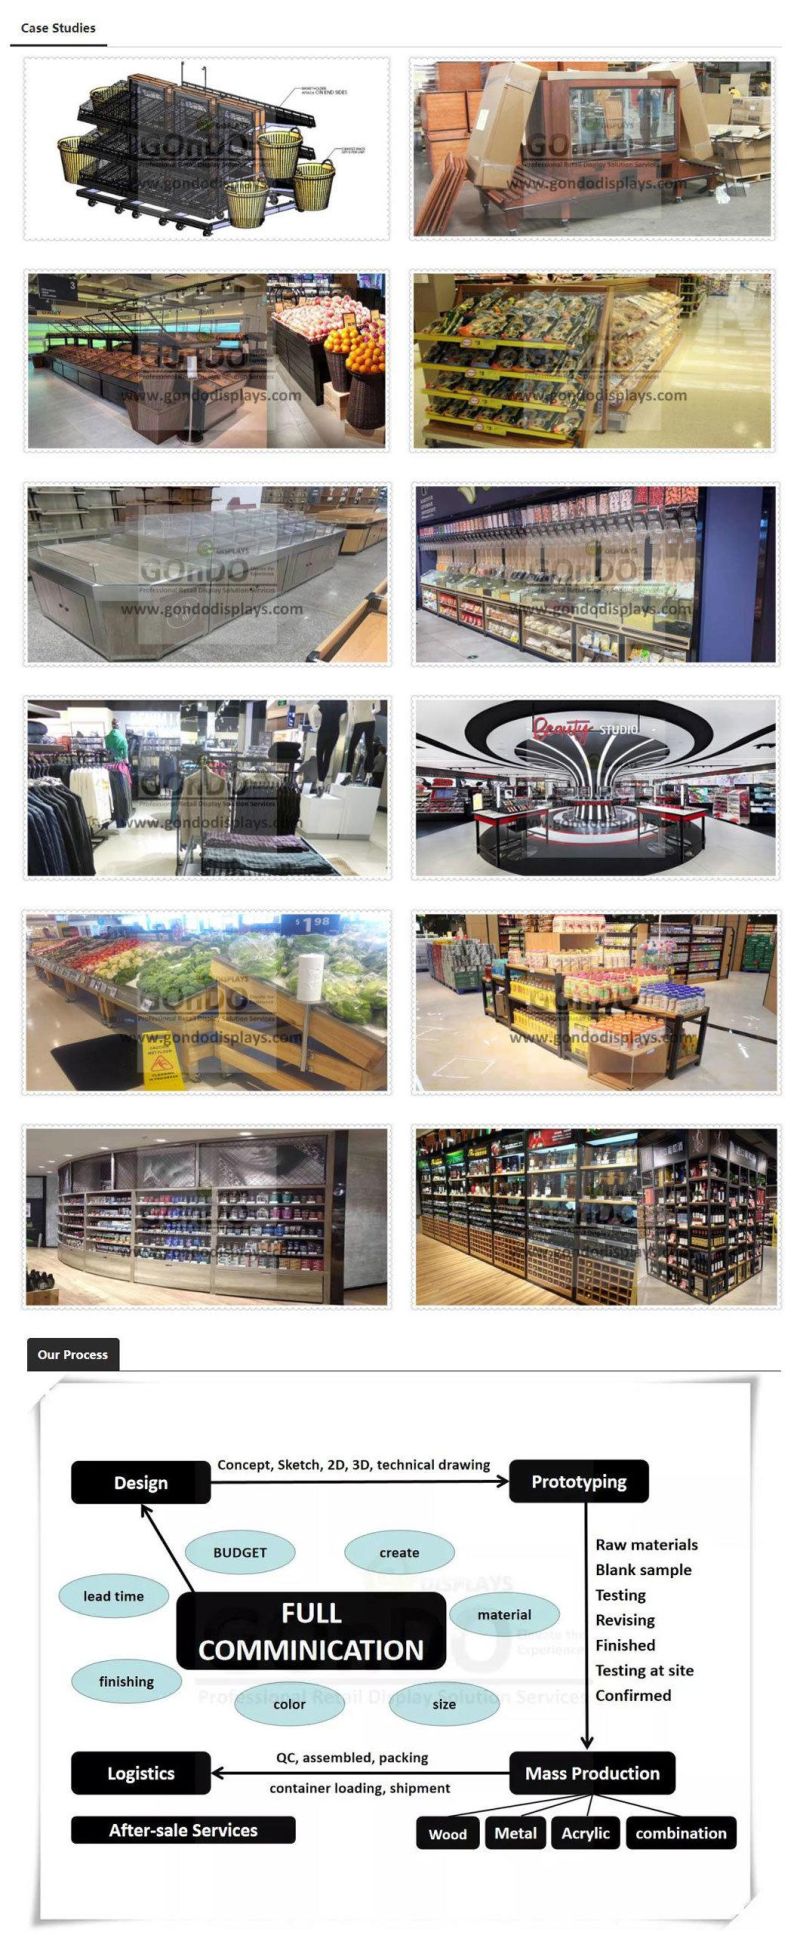 Supermarket Store Flooring Hanging Metal Wire Candy Cookie Food Grocery Retail Shelving